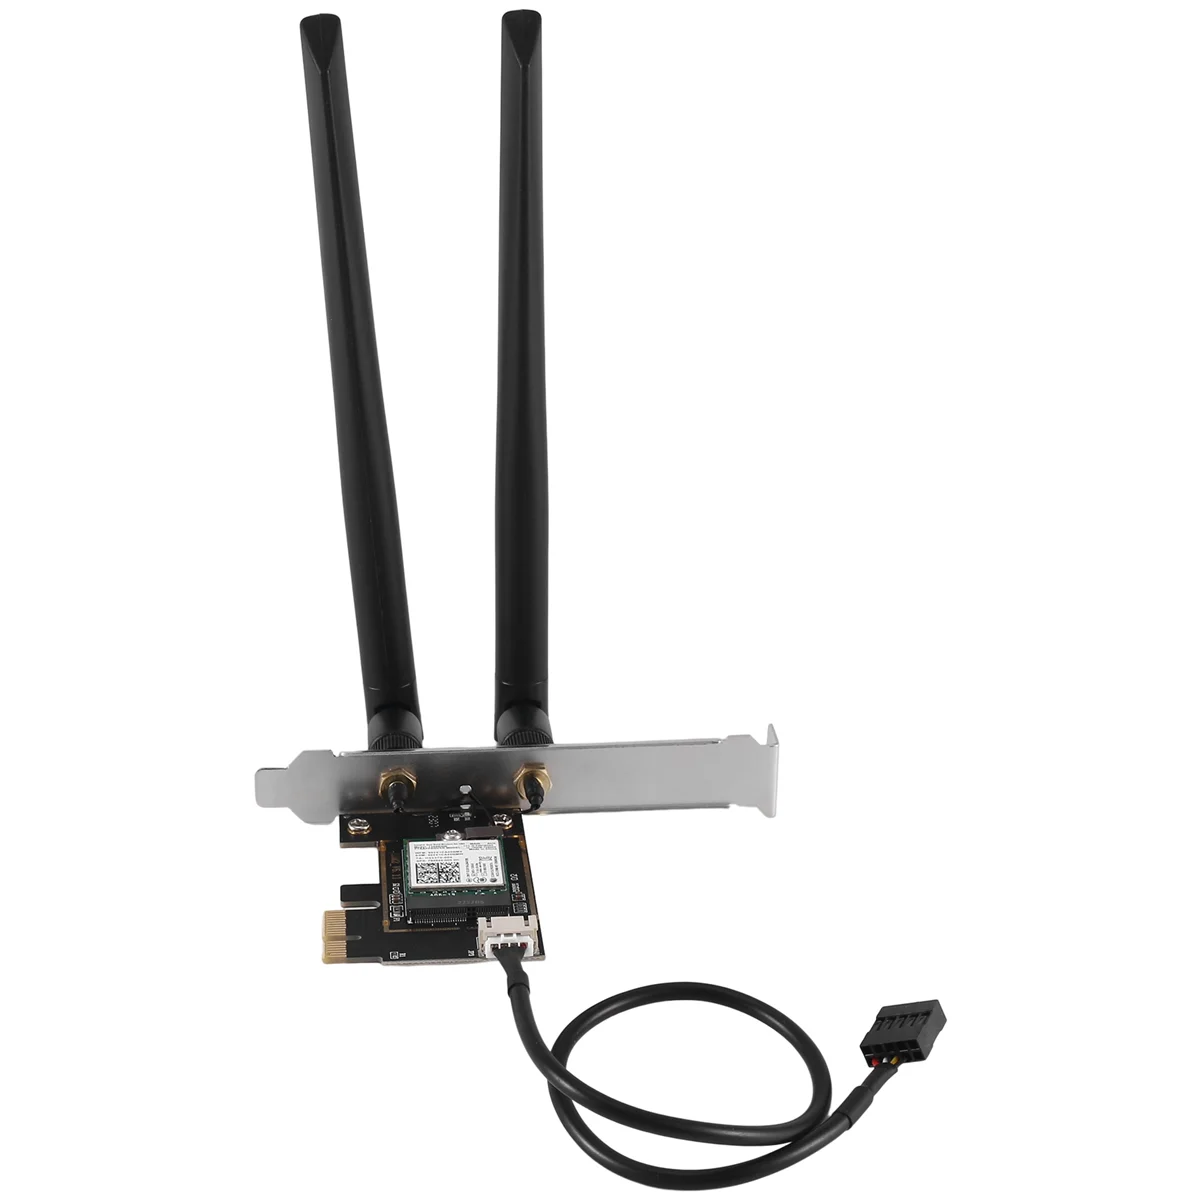 

AC7260 7260NGW WiFi Card 2.4G/5G 867Mbps 802.11AC+Bluetooth Wireless Card Adapter PCIE Adapter with 2X8DB Antenna